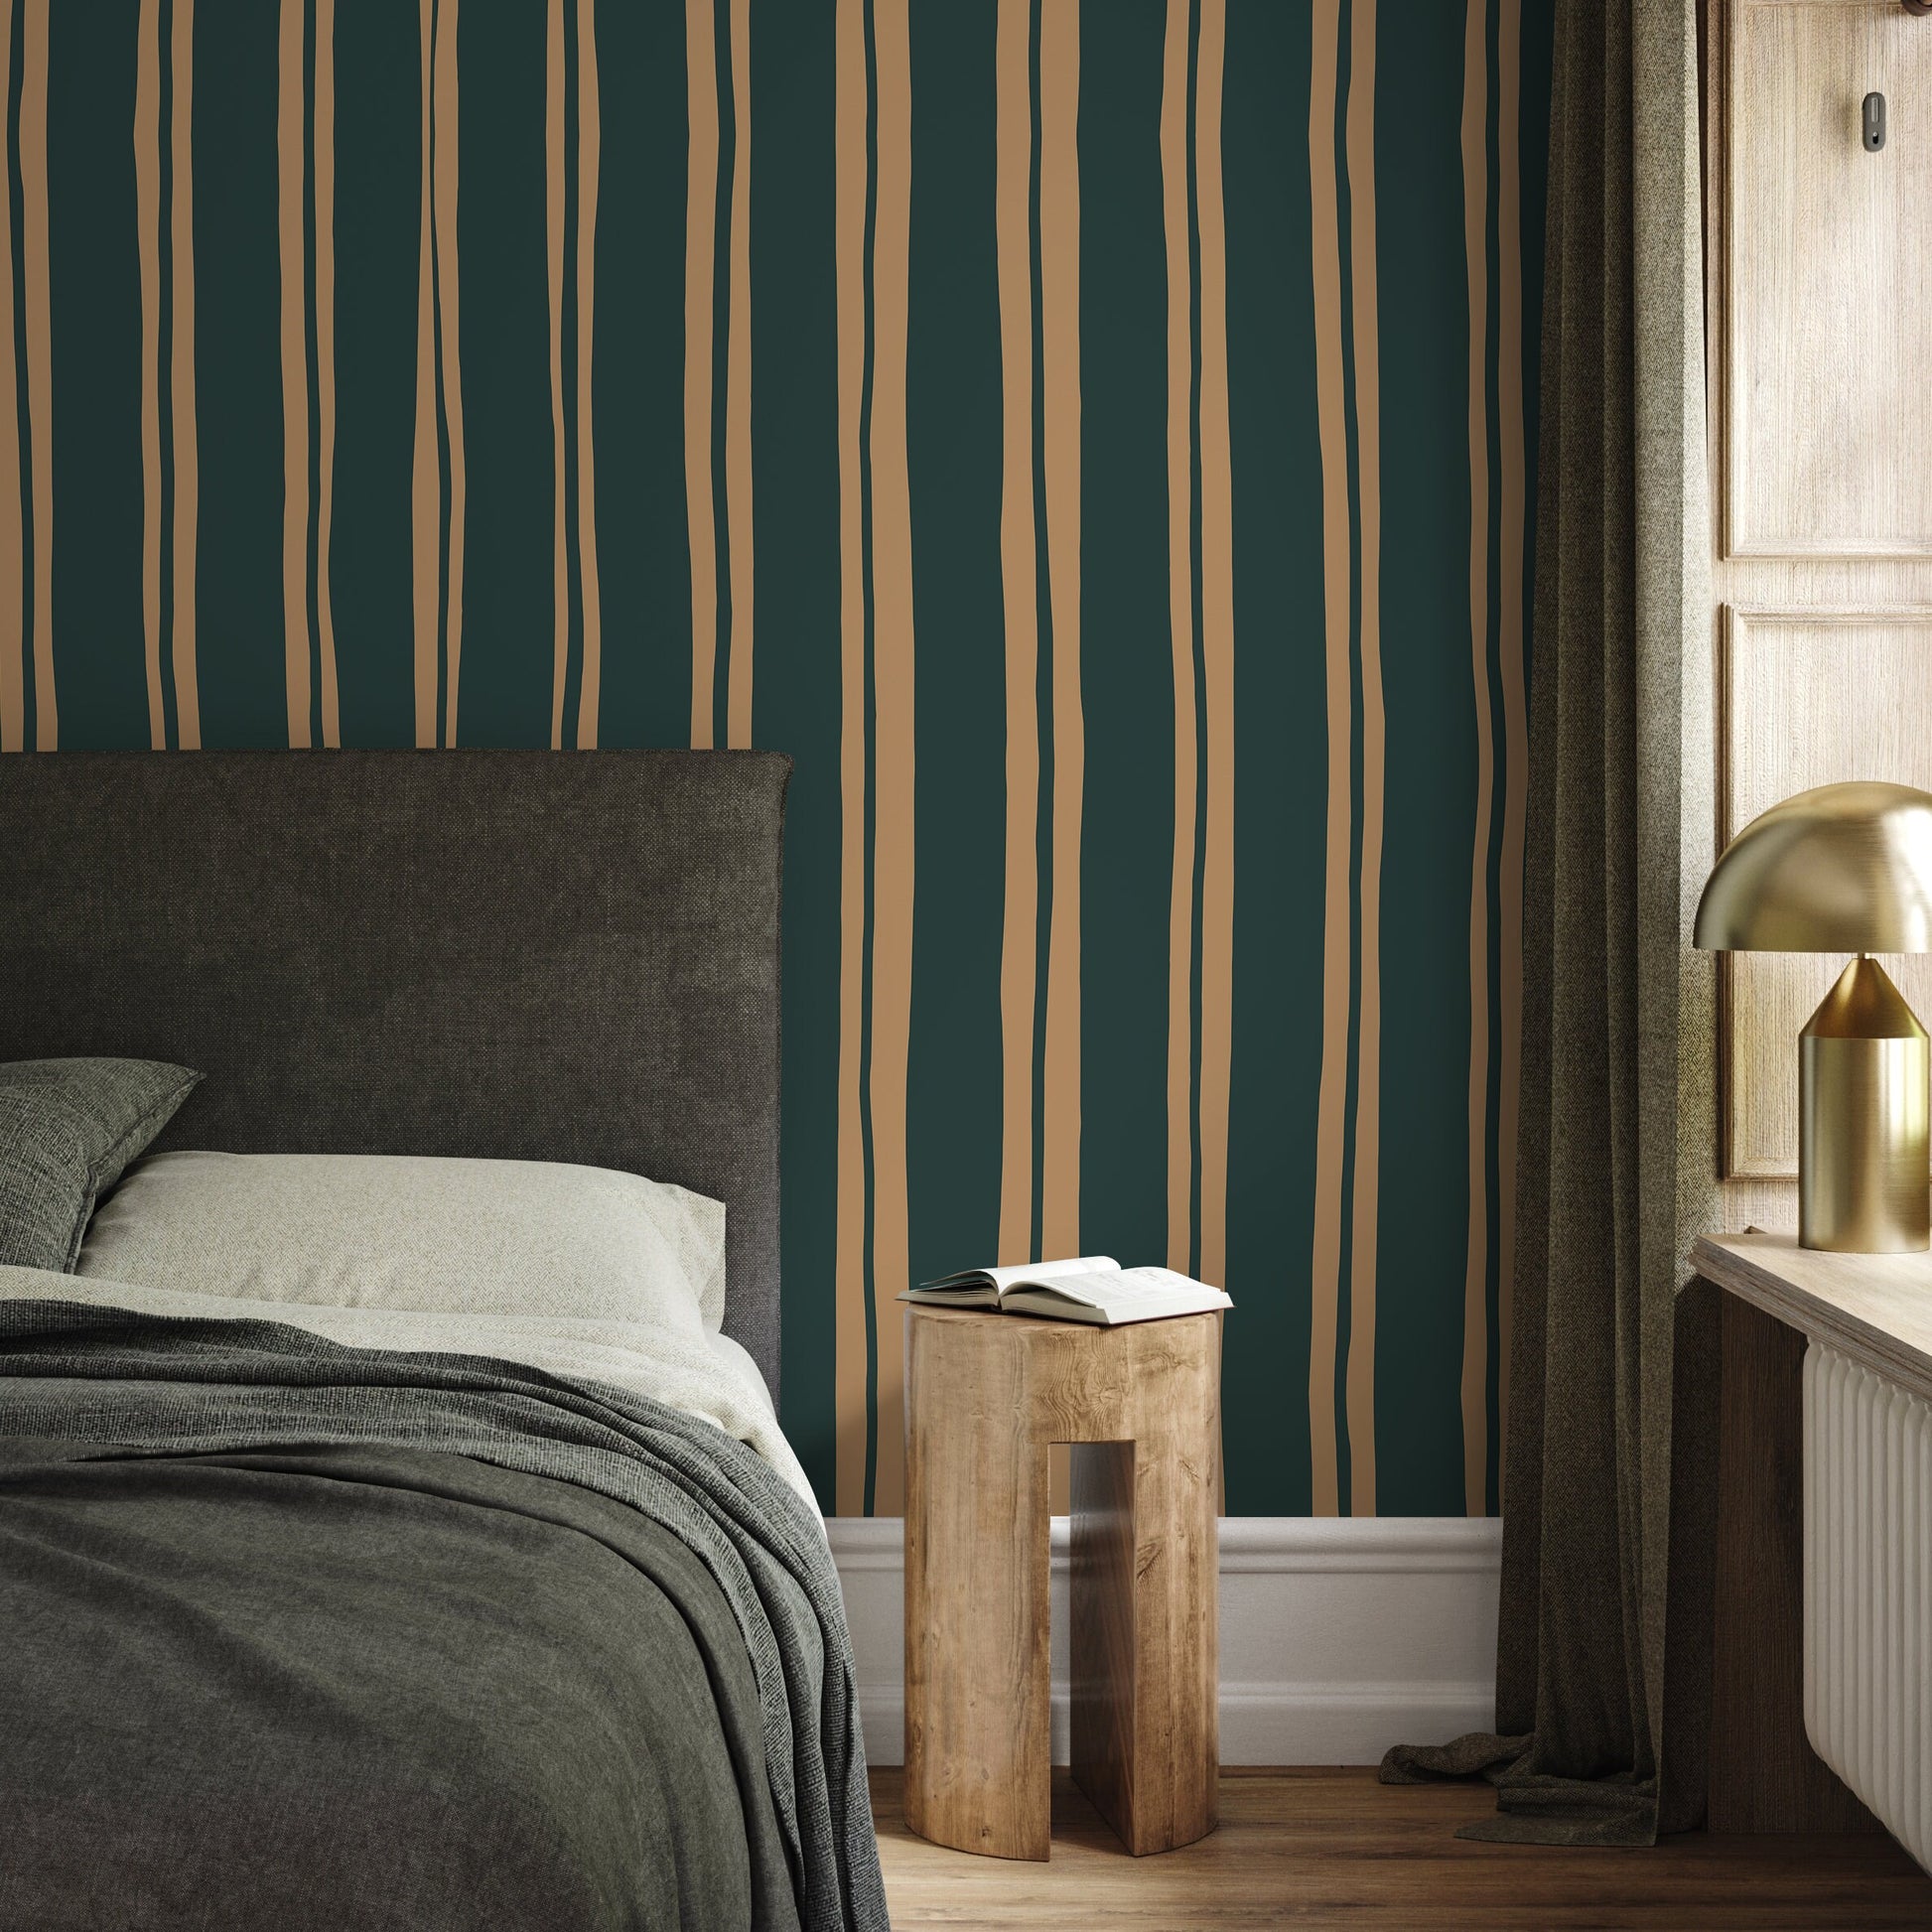 Green and Beige Lines Wallpaper Striped Wallpaper Peel and Stick and Traditional Wallpaper - D766